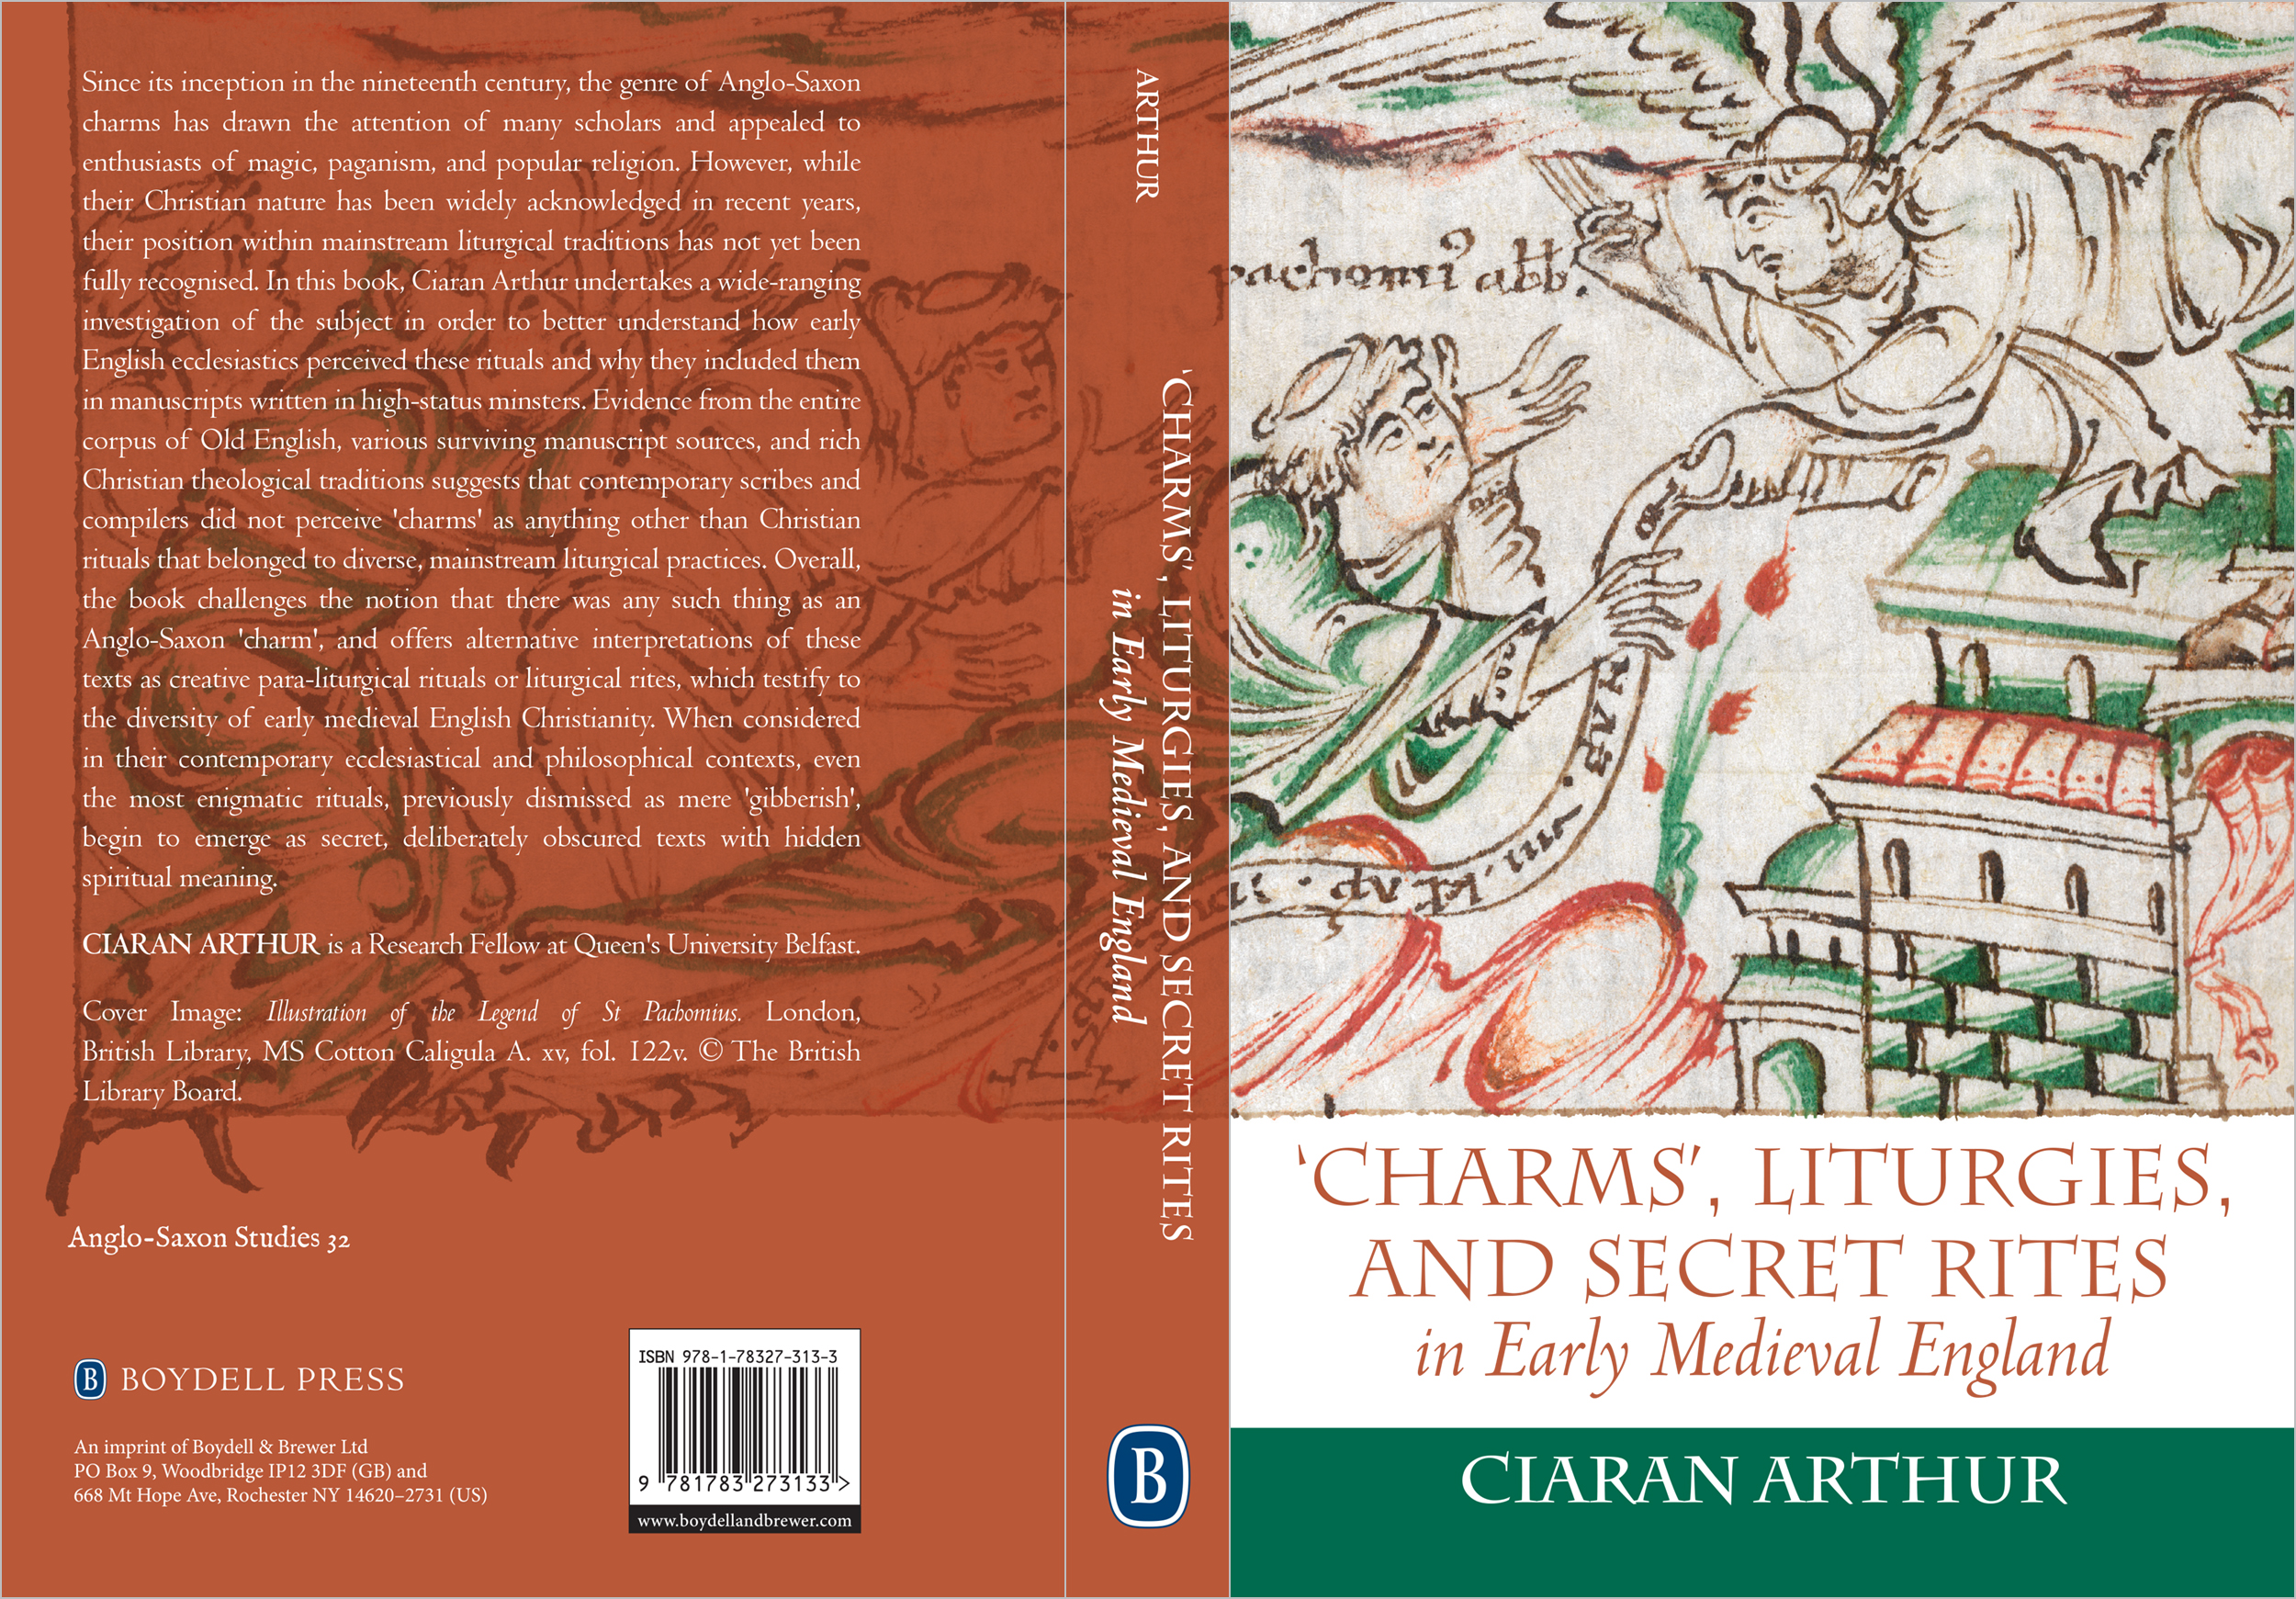 'Charms', Liturgies, and Secret Rites